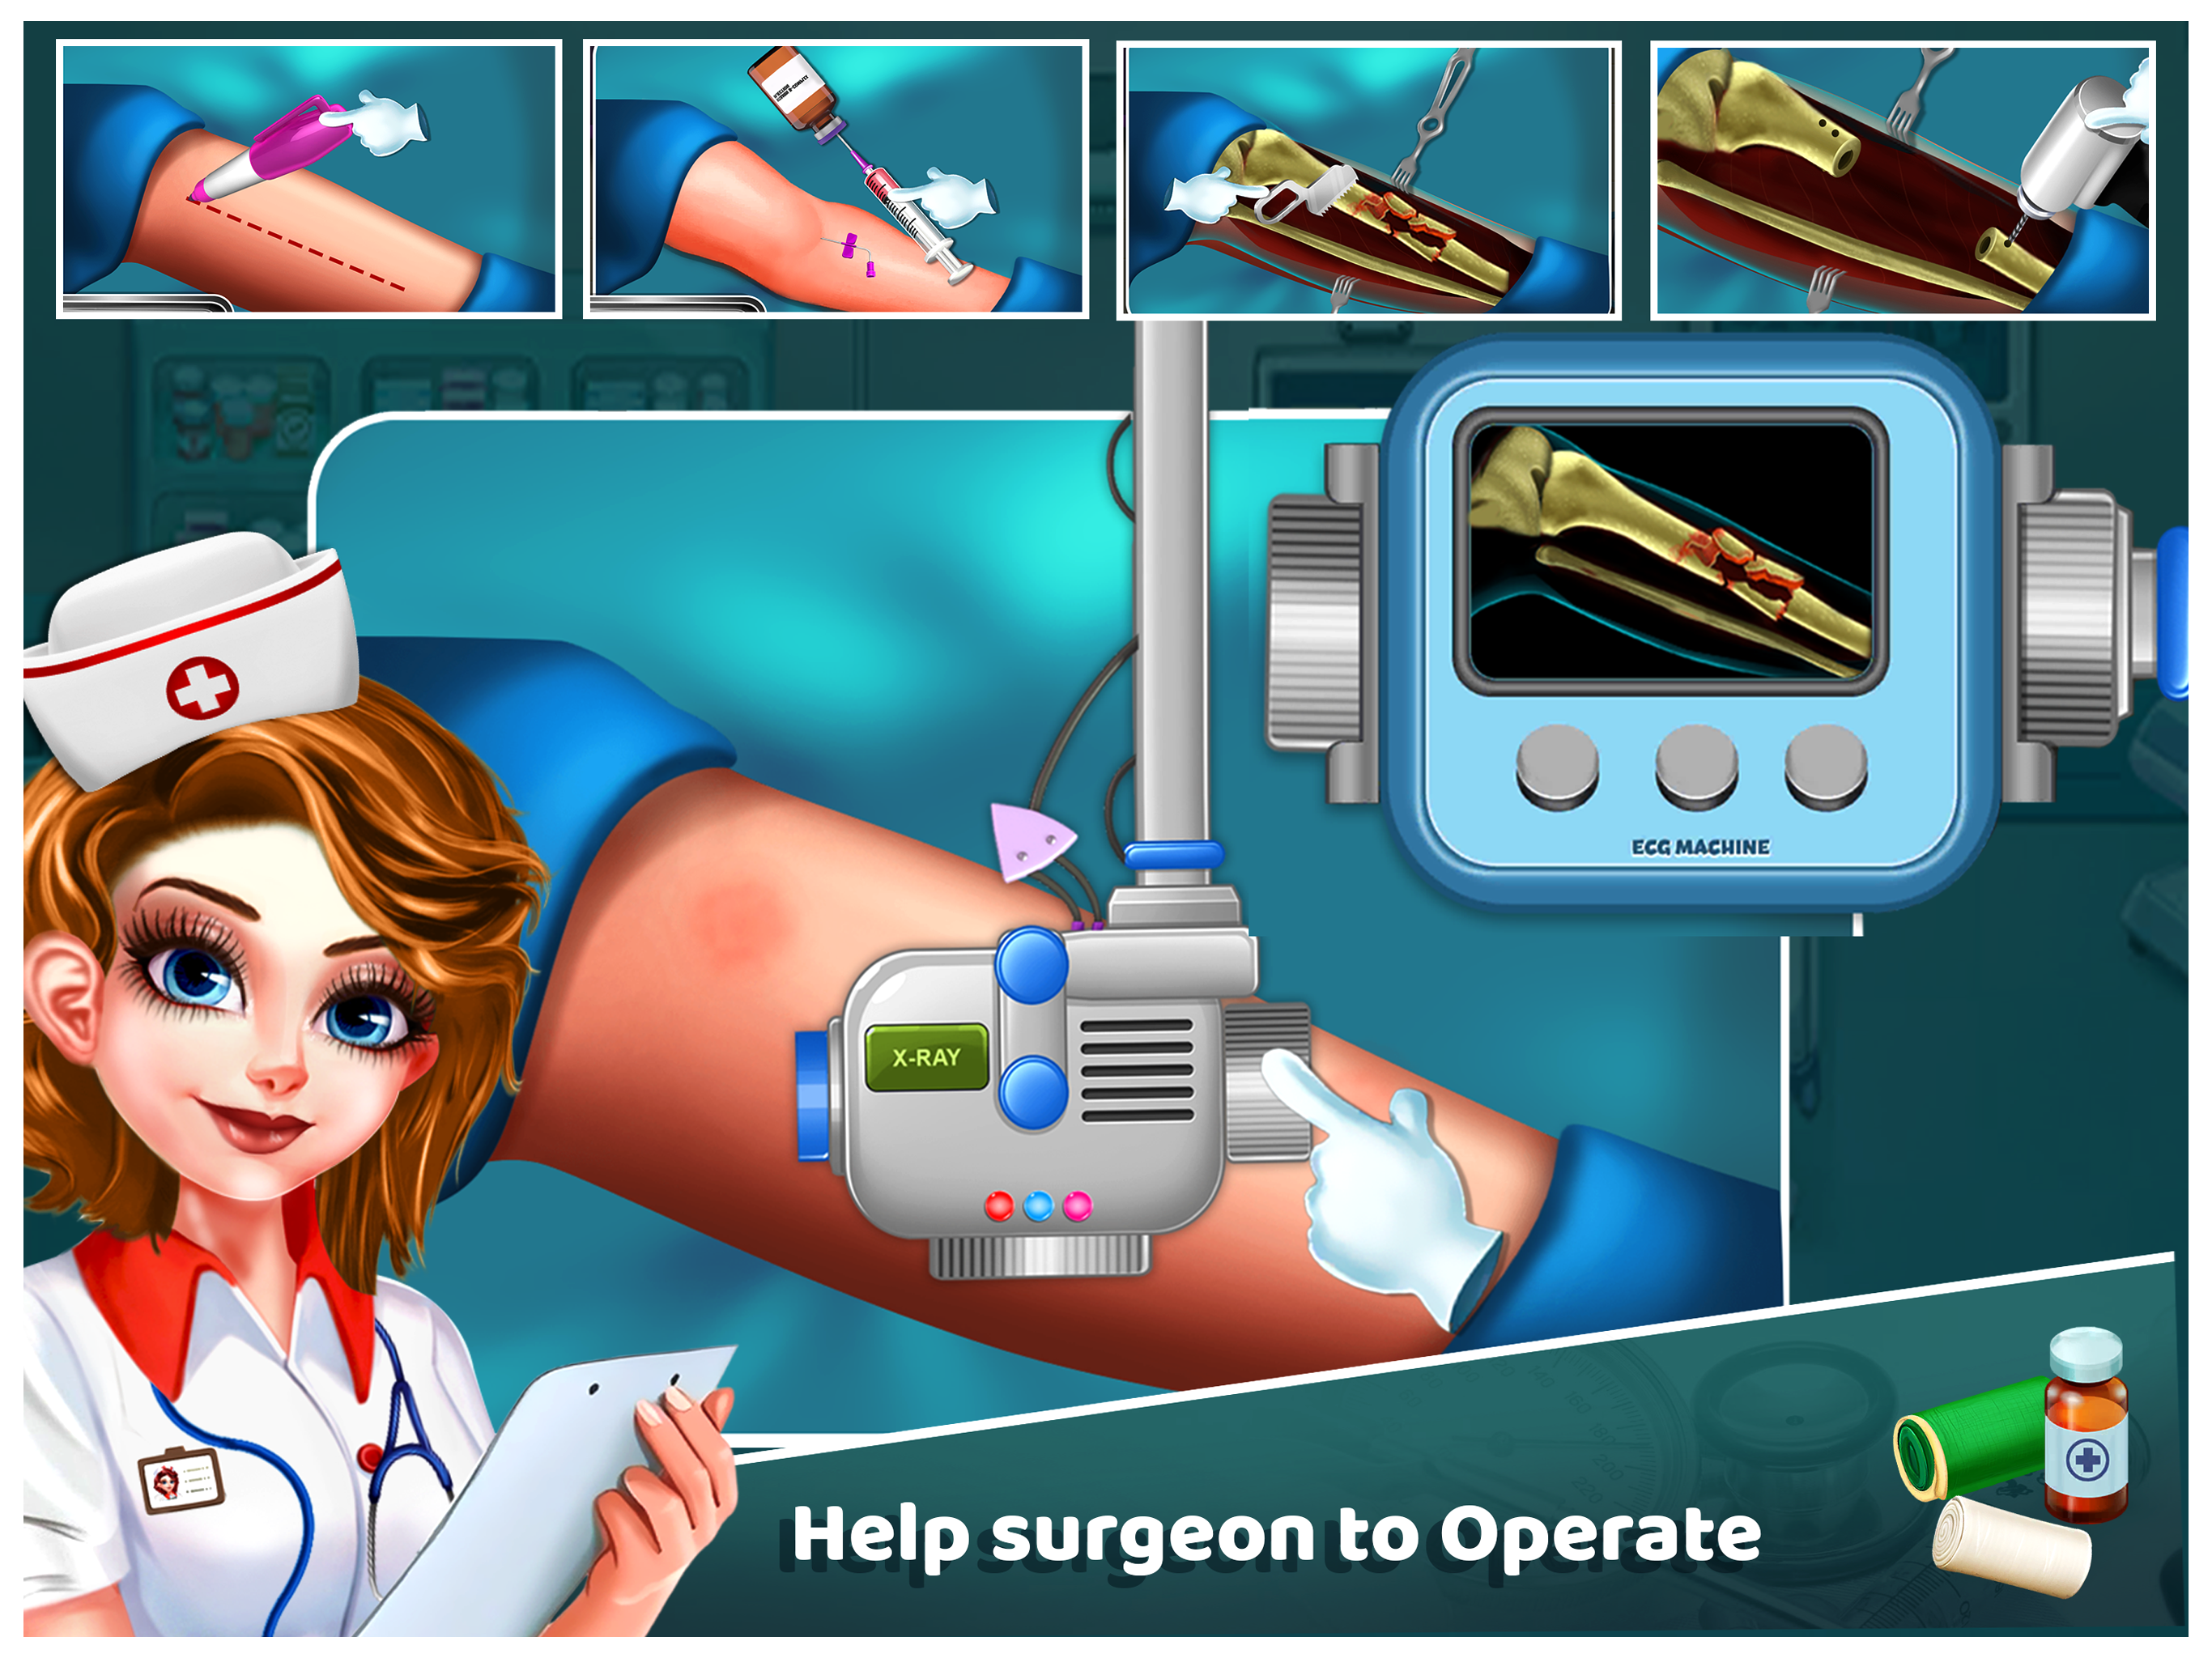 Multi Surgery Hospital: Doctor Game